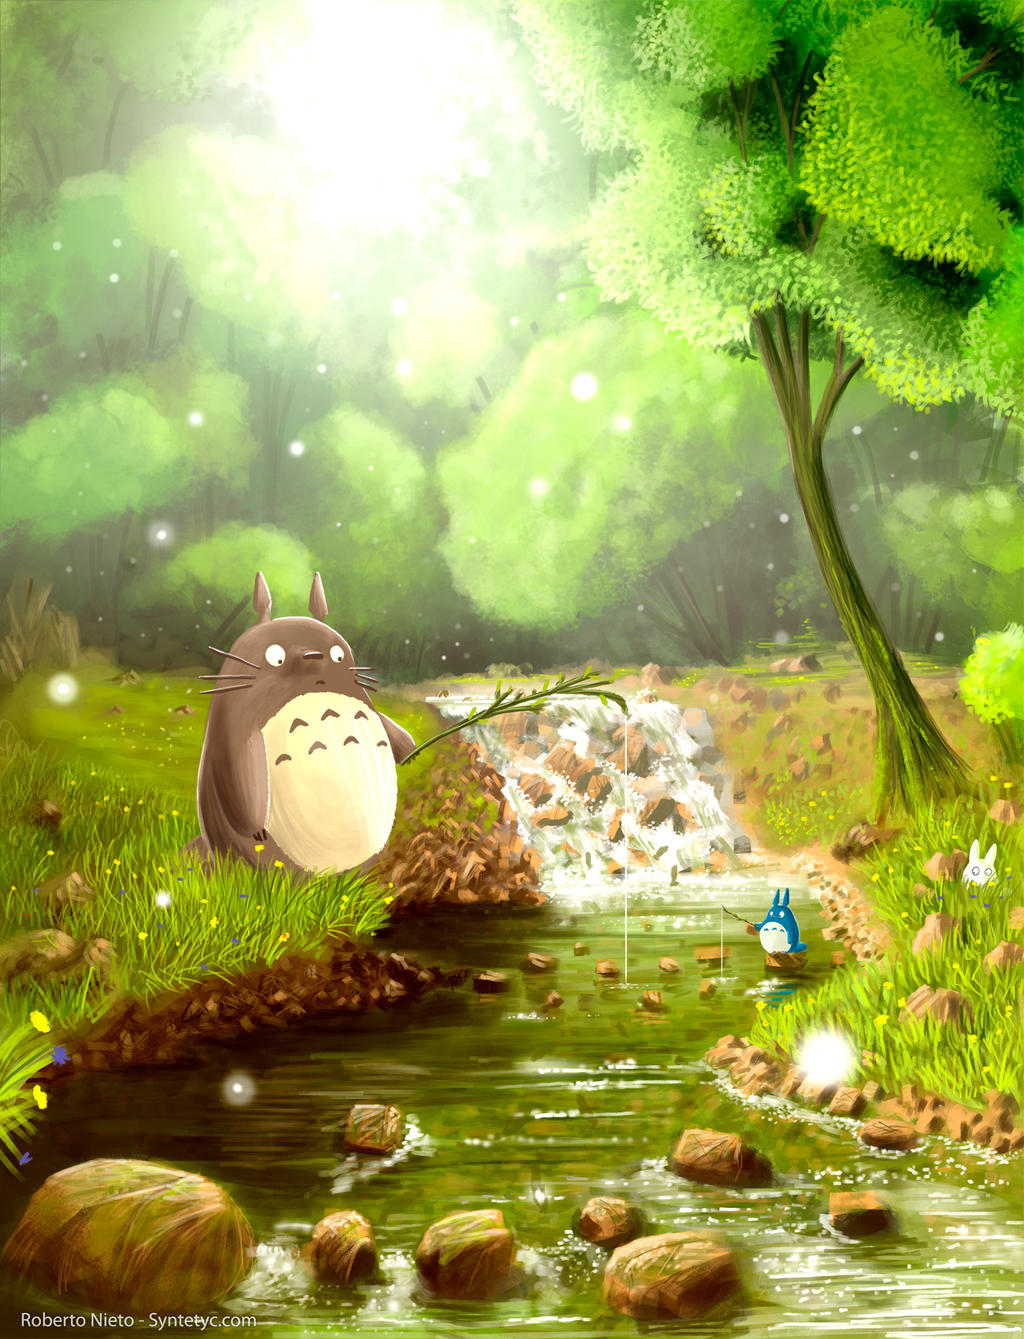 A moment in Totoro's life